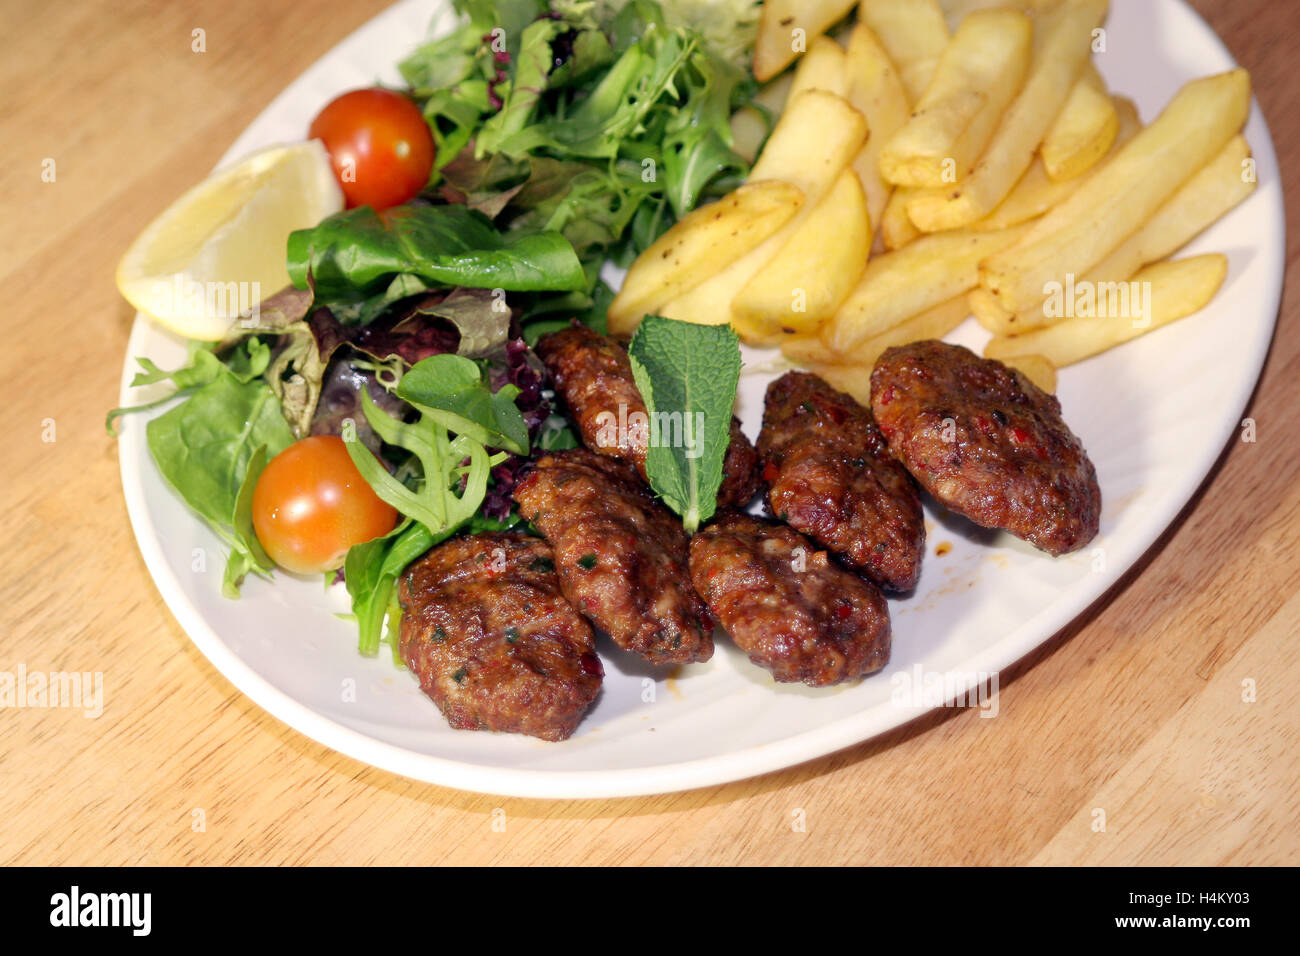 Grilled Meatball served with fries and salad Stock Photo